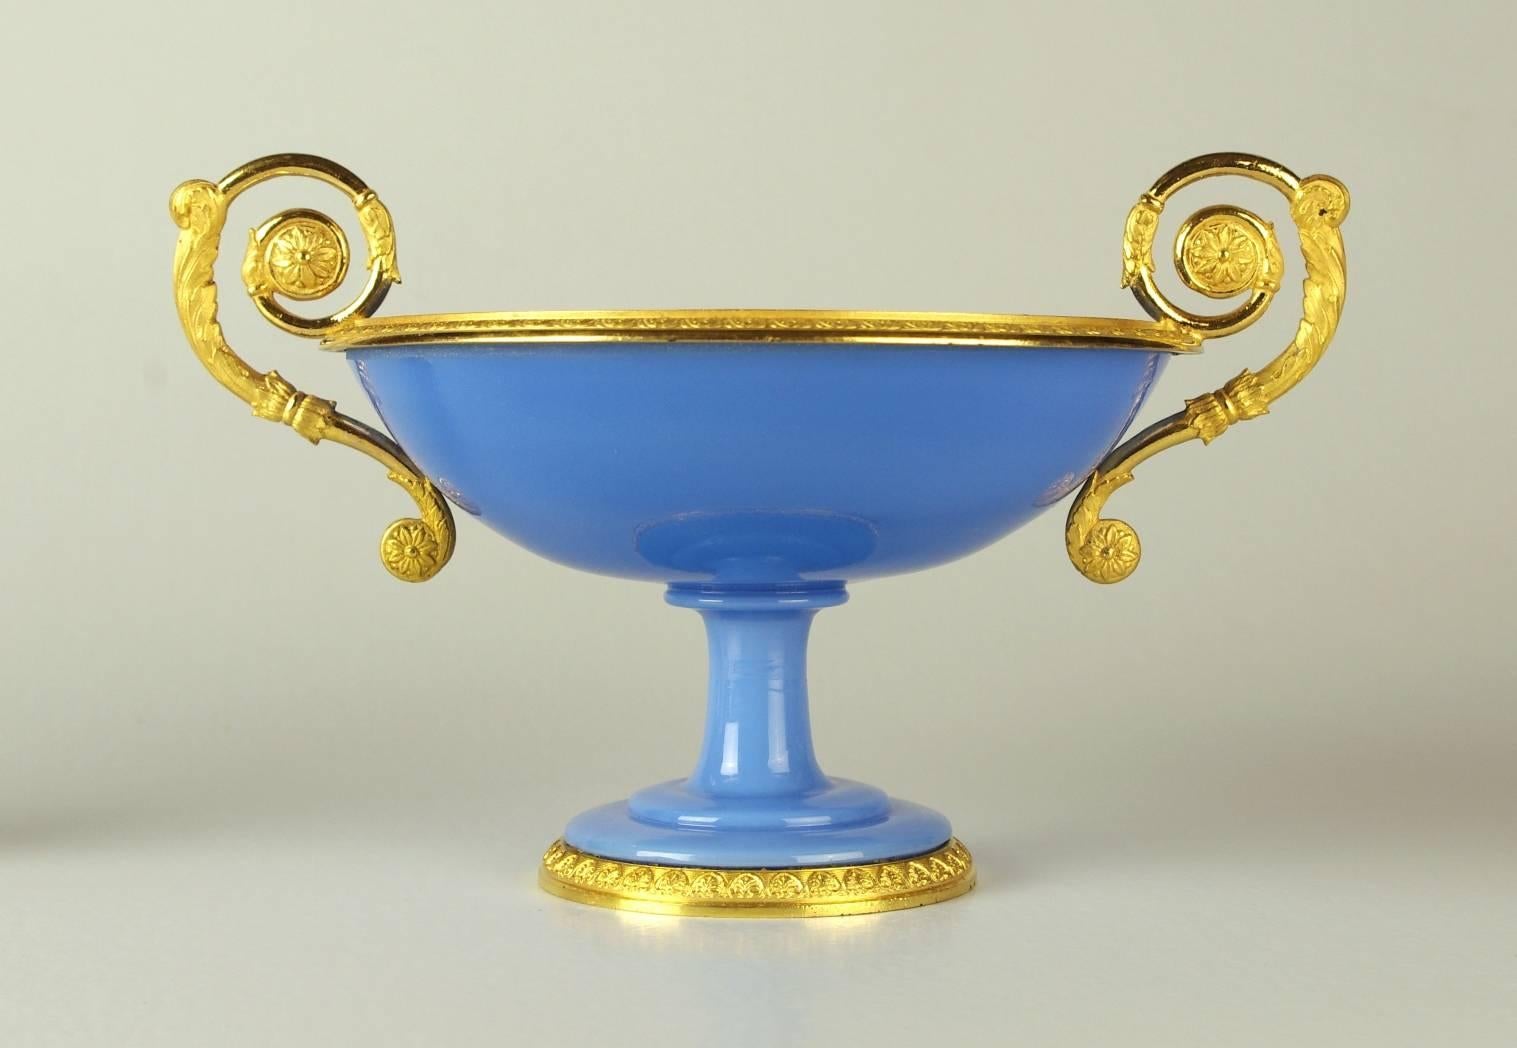 Fine and rare Charles X blue opaline compote, the bowl mounted with matte and burnished scroll handles; the rim and foot with palmettes.

This gorgeous objet d'art dates to circa 1825-1830, the early days of opaline production. The quality of the